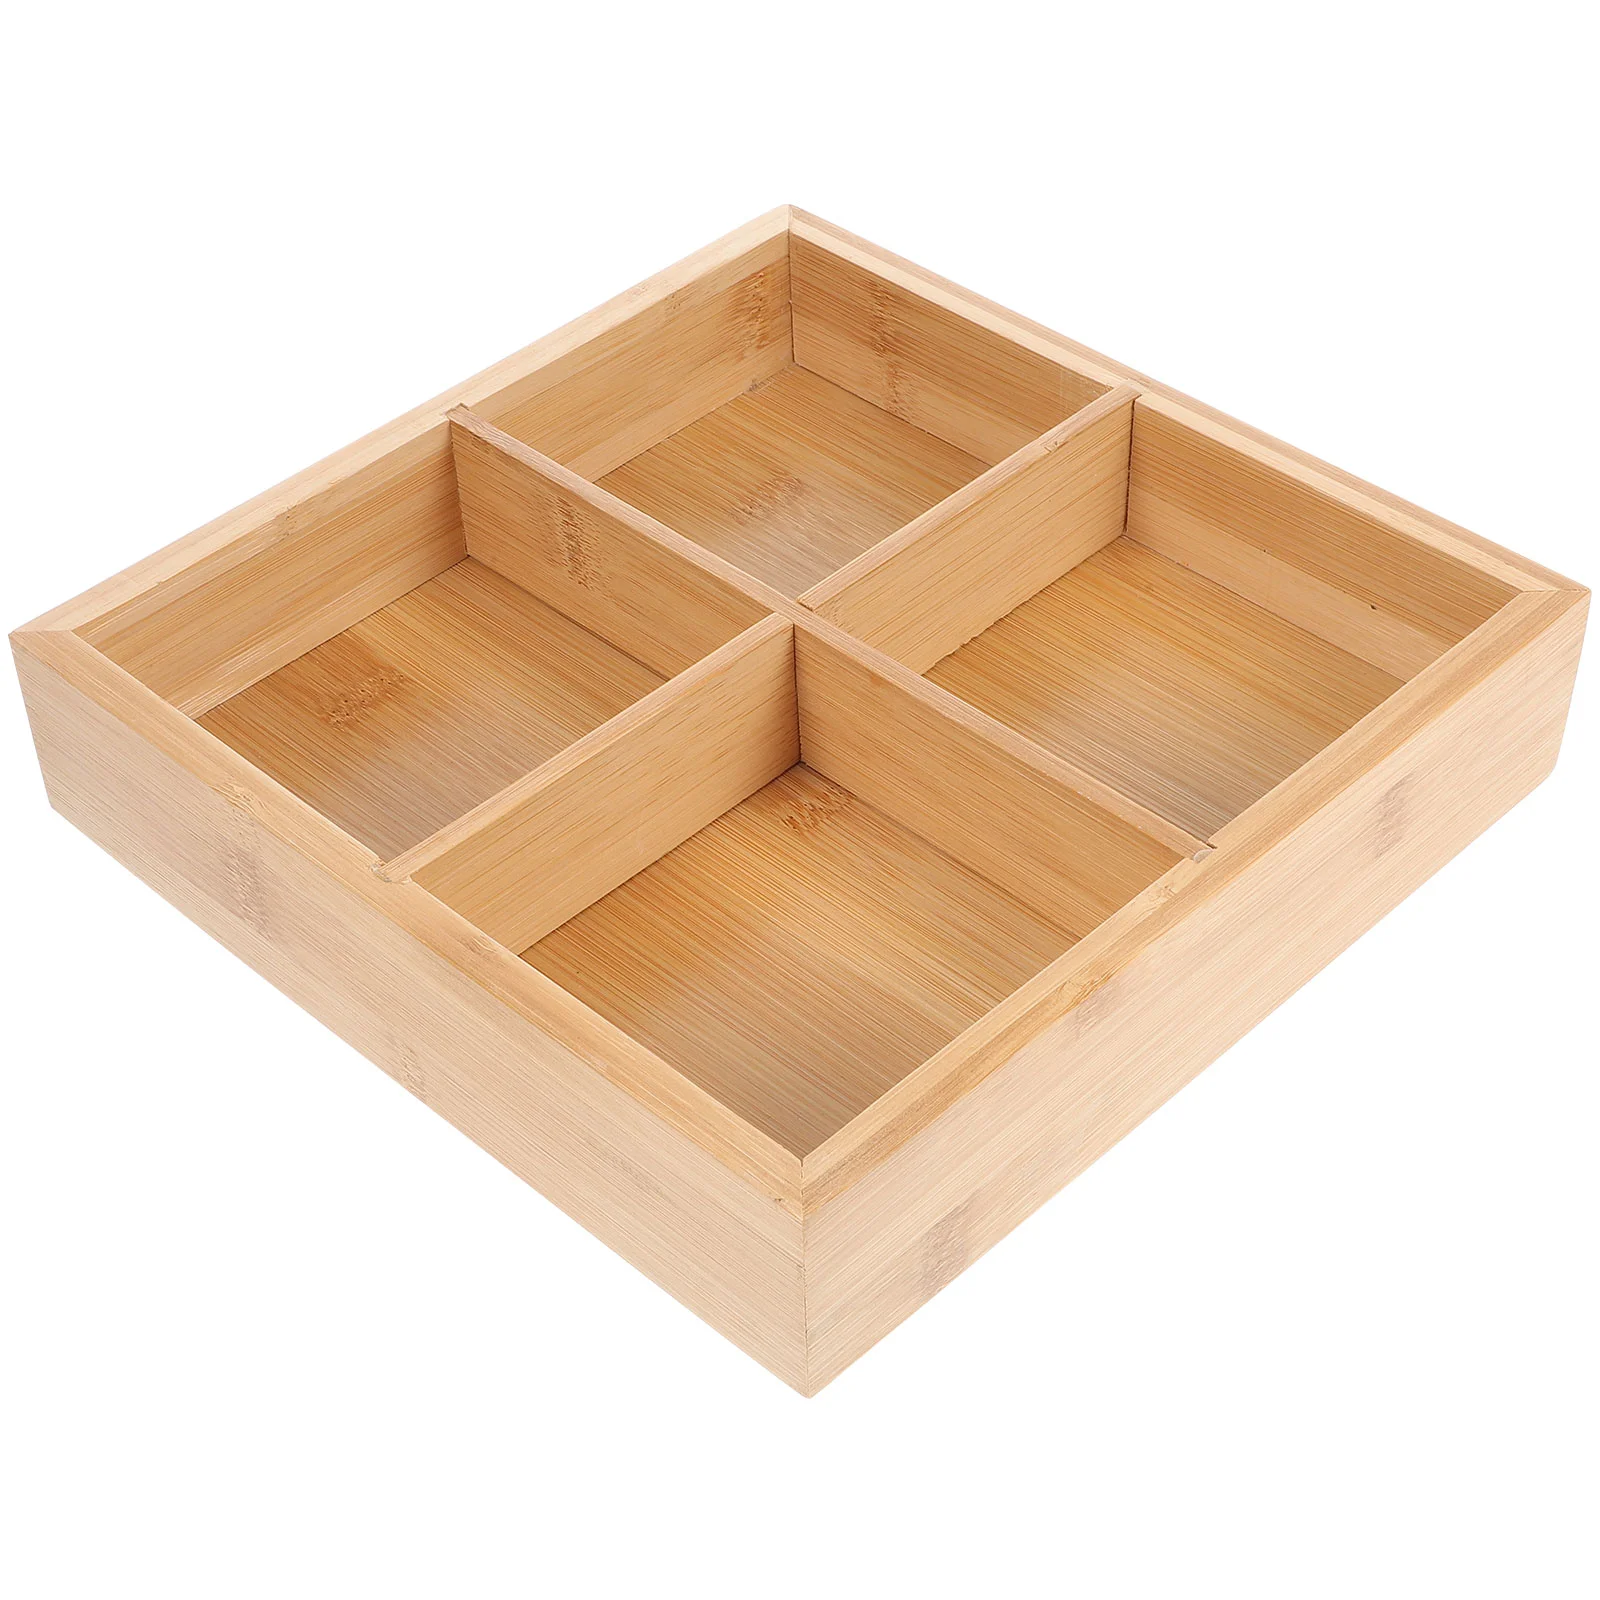 

Tray Serving Divided Platter Snack Wood Wooden Fruit Box Nut Compartment Plate Appetizer Trays Candy Pot Hot Veggie Dried Party